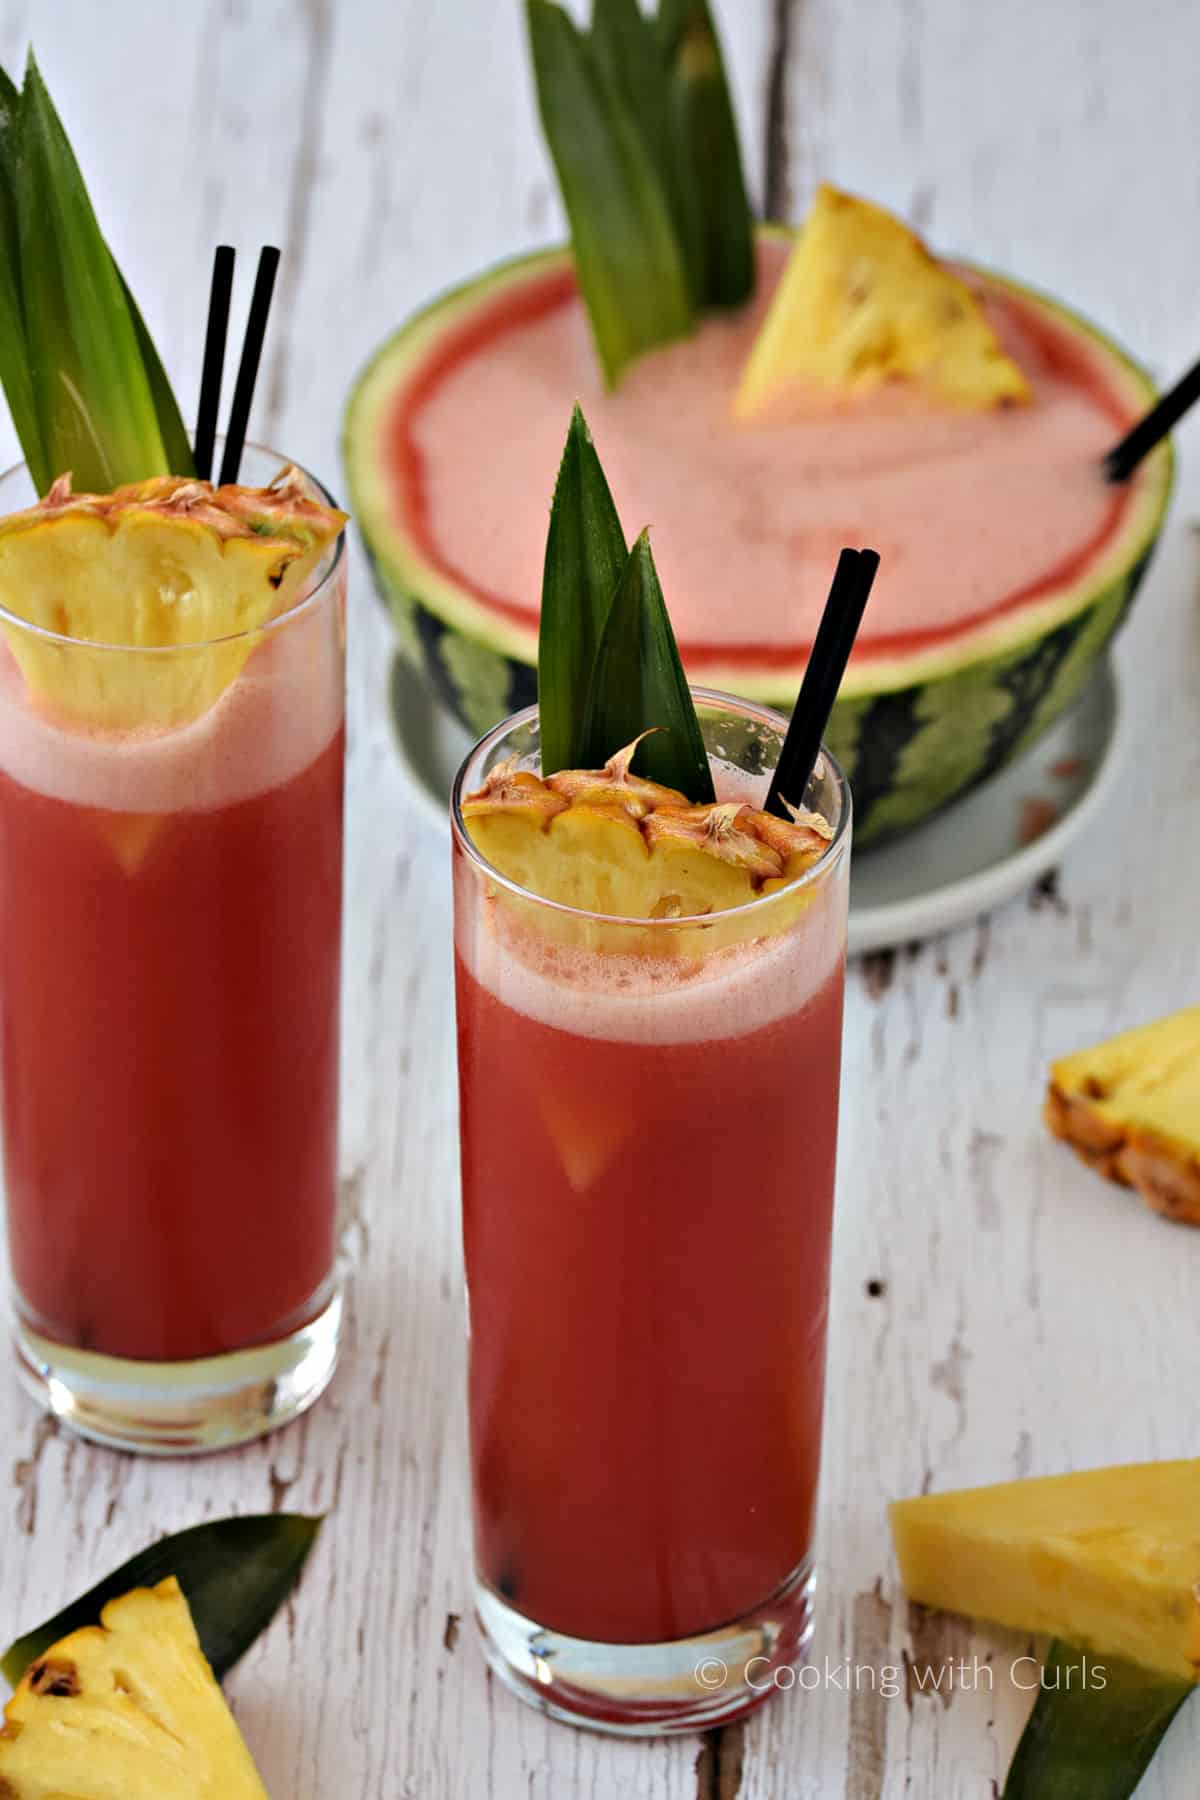 Bright pink punch served in two tall glasses garnished with pineapple leaves and wedges and a filled, hallowed out mini watermelon in the background.